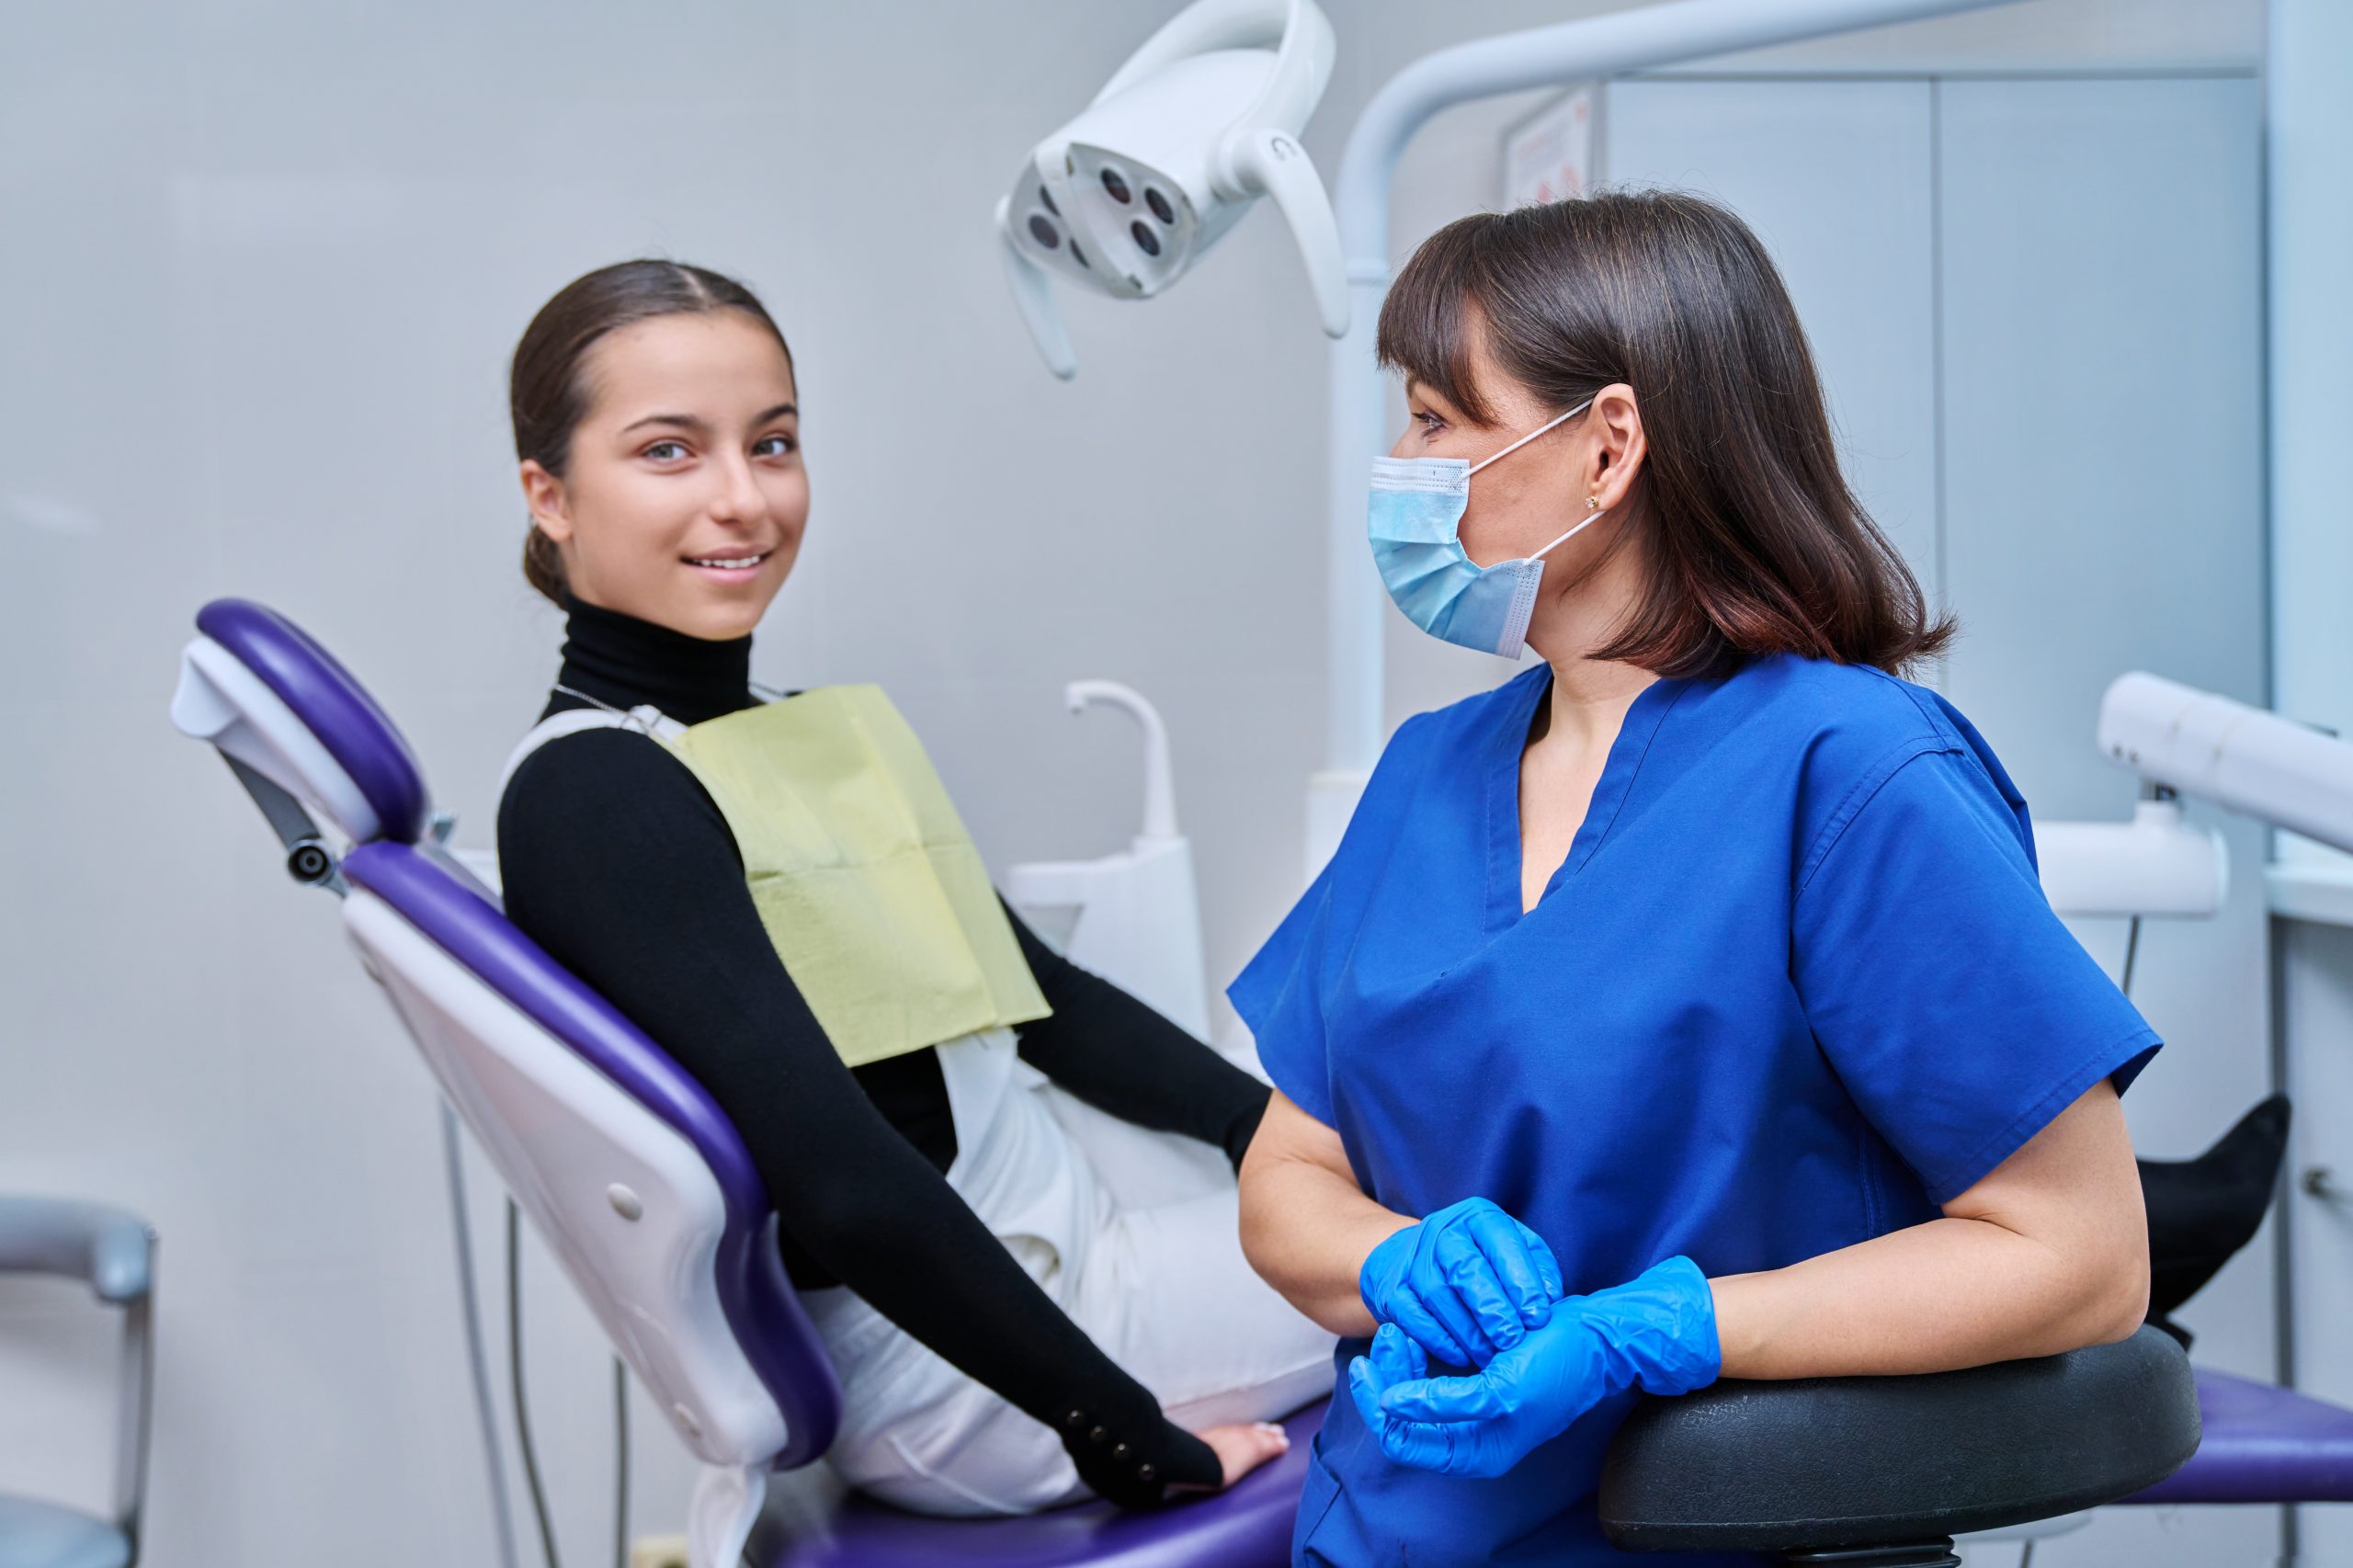 Female dentist with young teenage girl patient sitting in dental chair. Dentistry, hygiene, treatment, medicine, specialist, career, dental health care concept